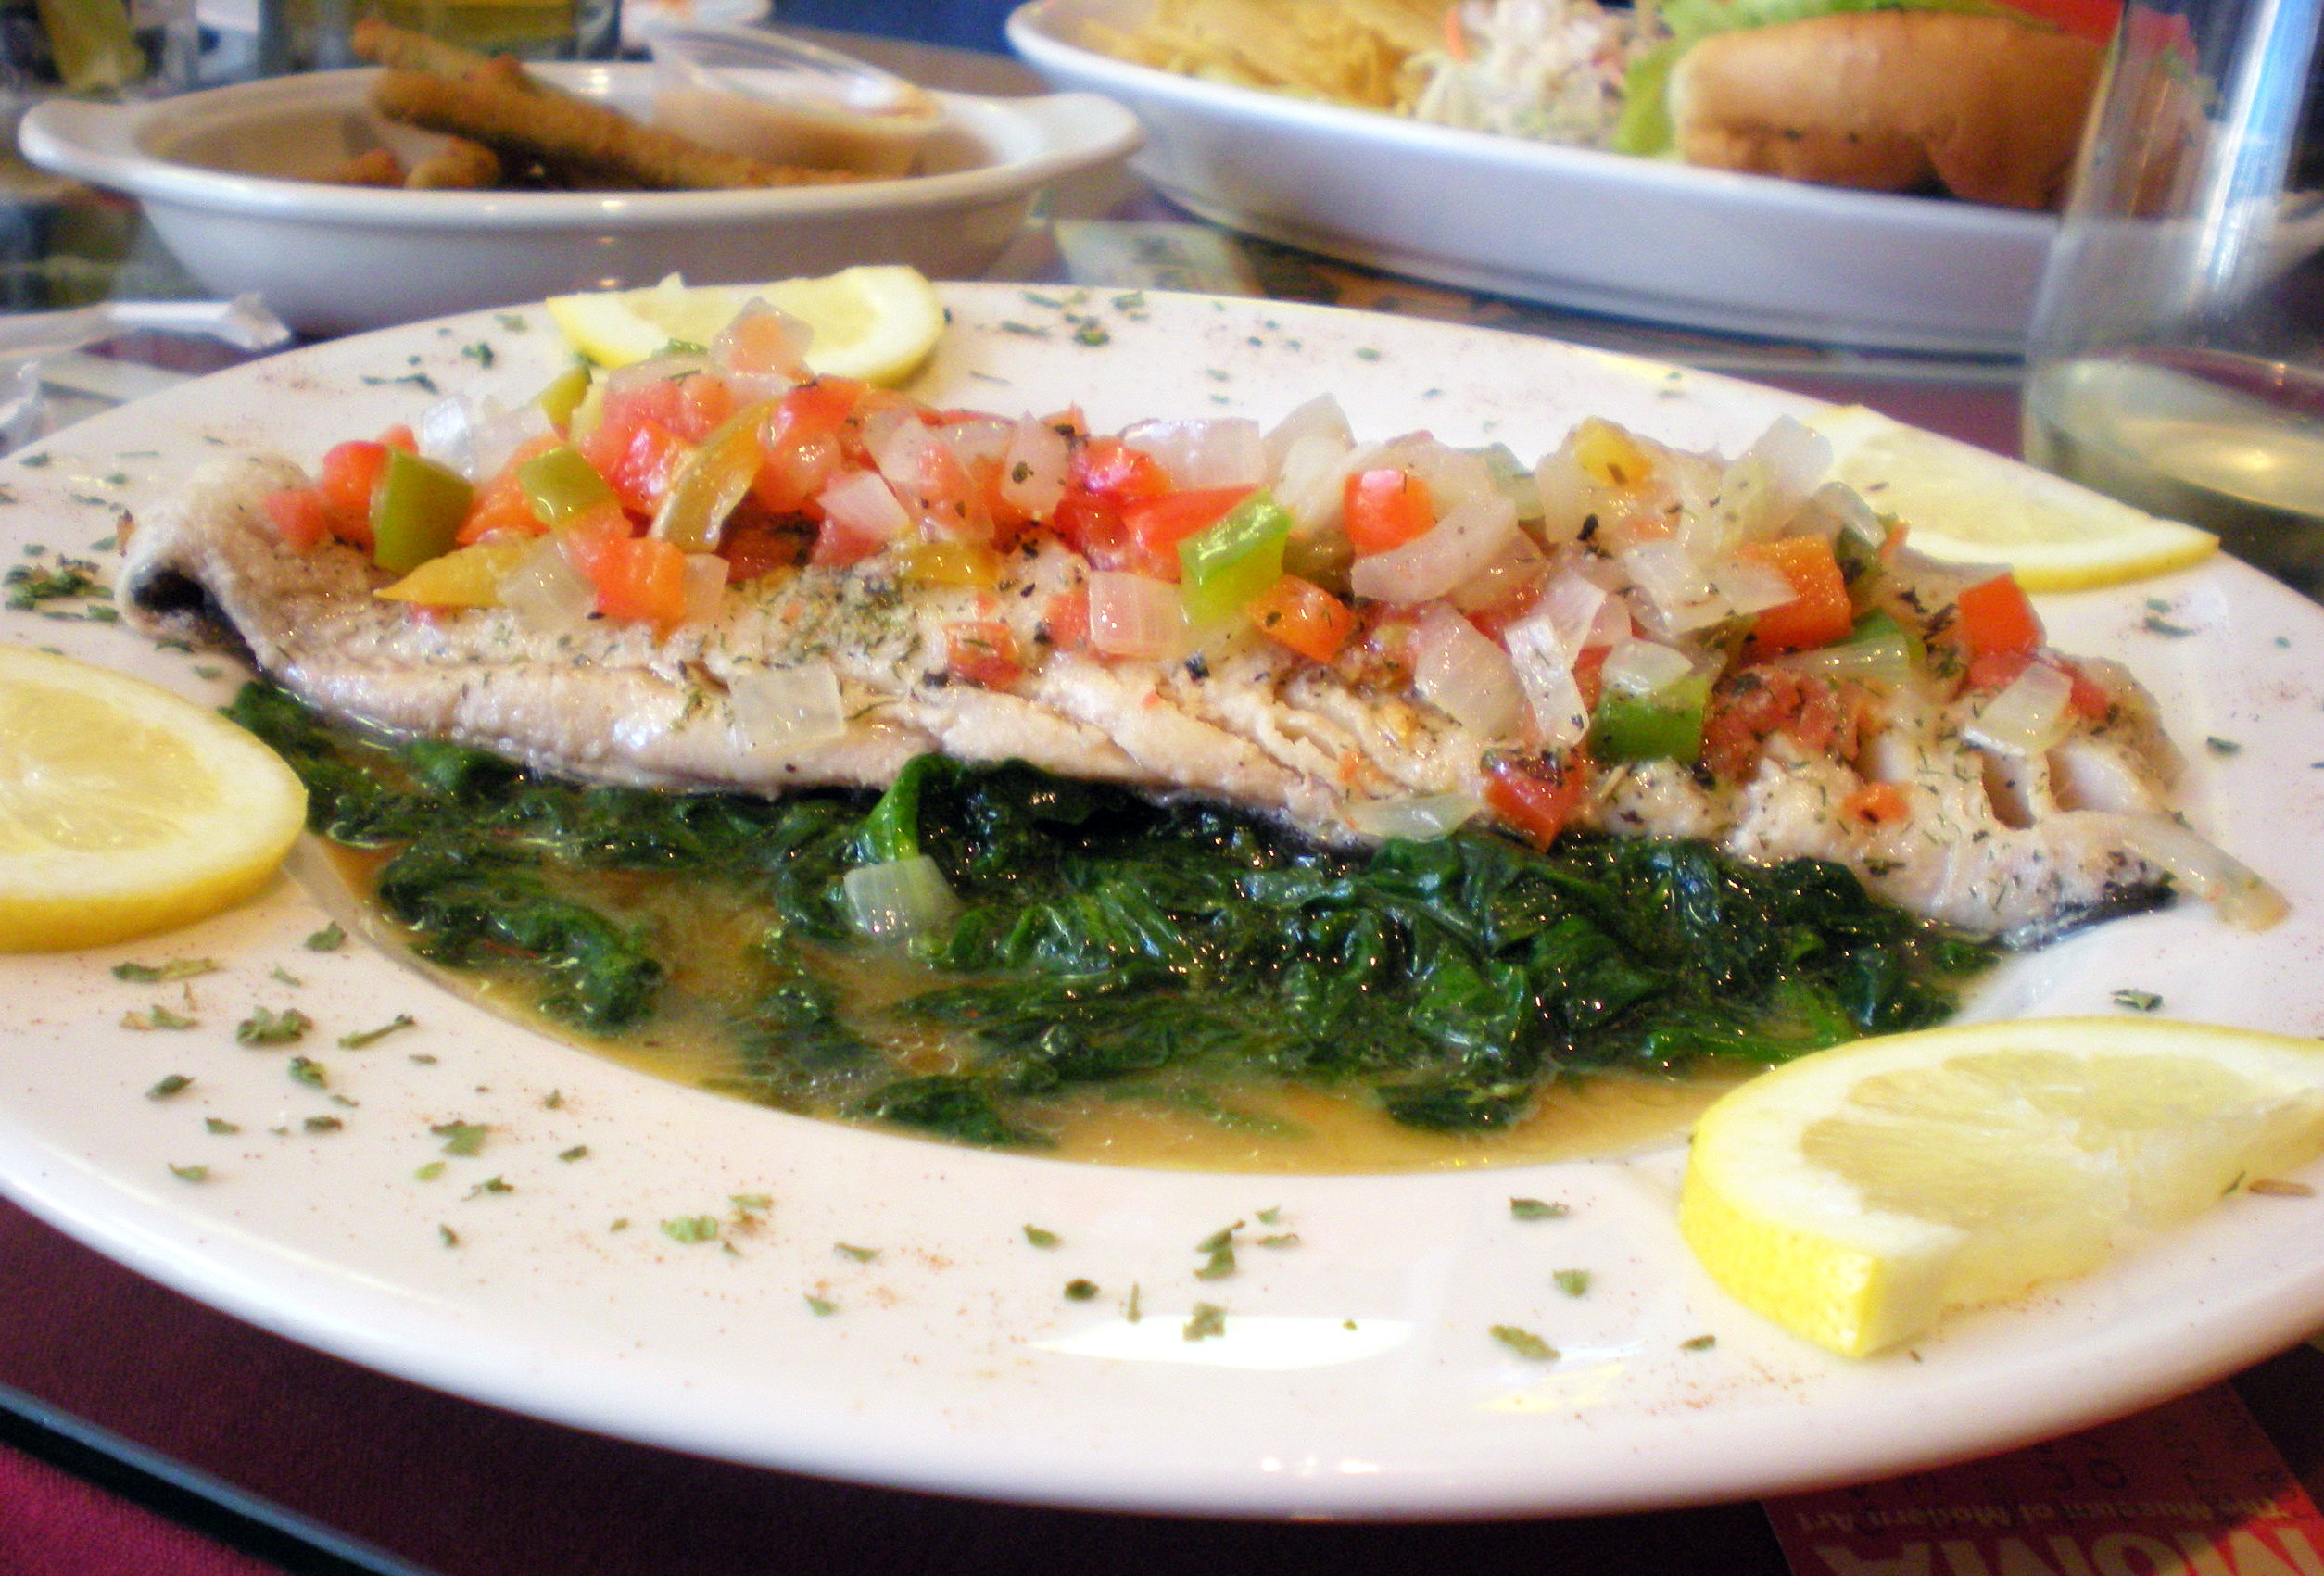 Haddock Florentine: 10 ounces of fresh haddock baked in Chablis and lemon. The fish is topped with onions, peppers, tomatoes and served with fresh sauteed spinach.